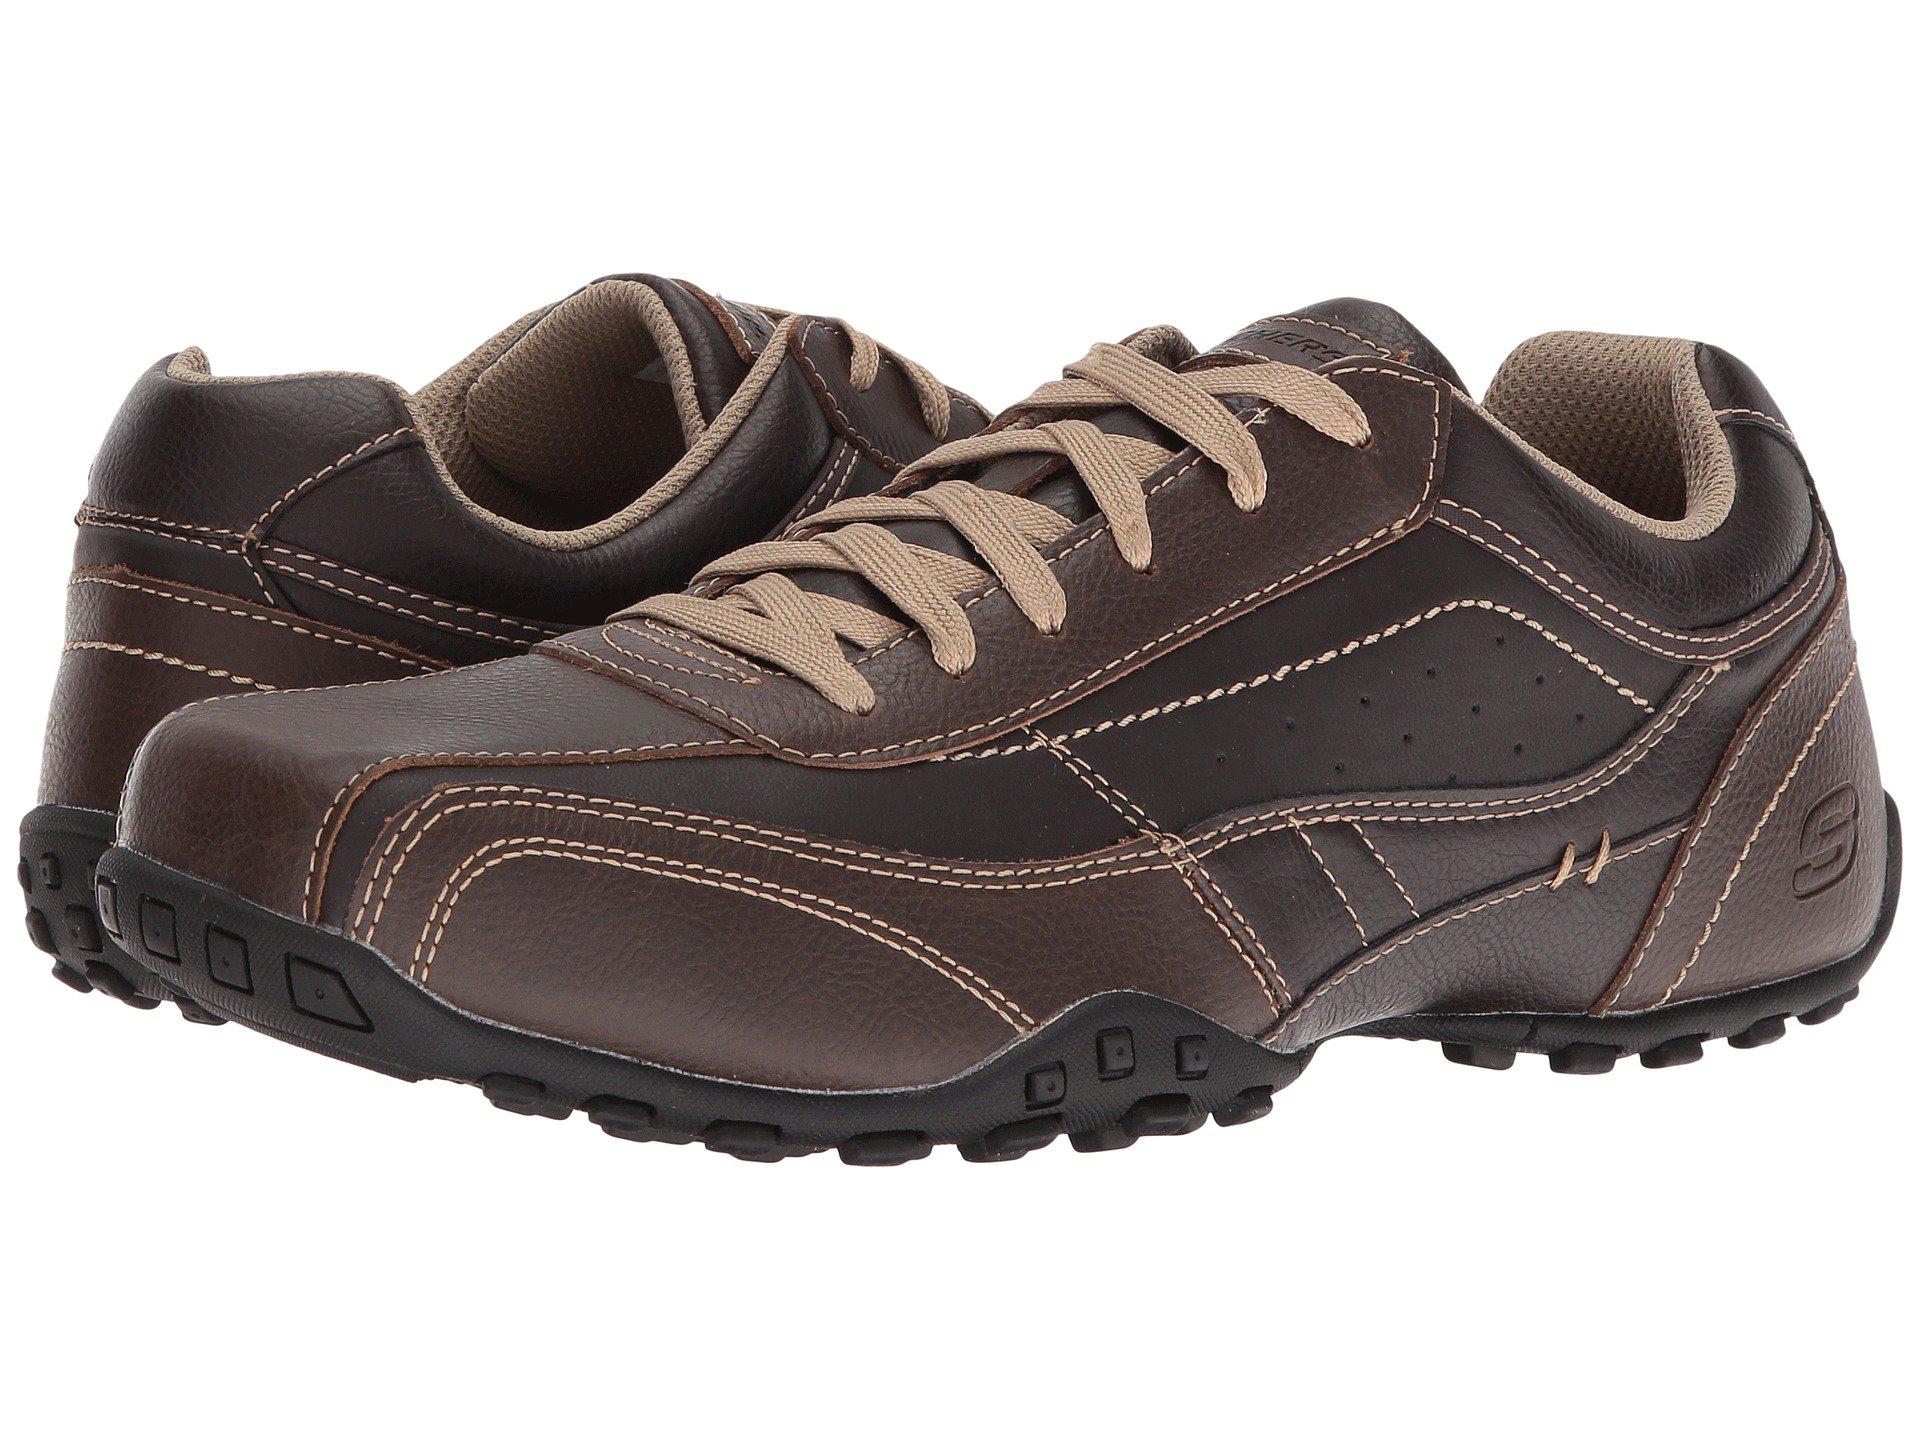 Lyst - Skechers Classic Fit Citywalk - Elison in Brown for Men - Save 30%